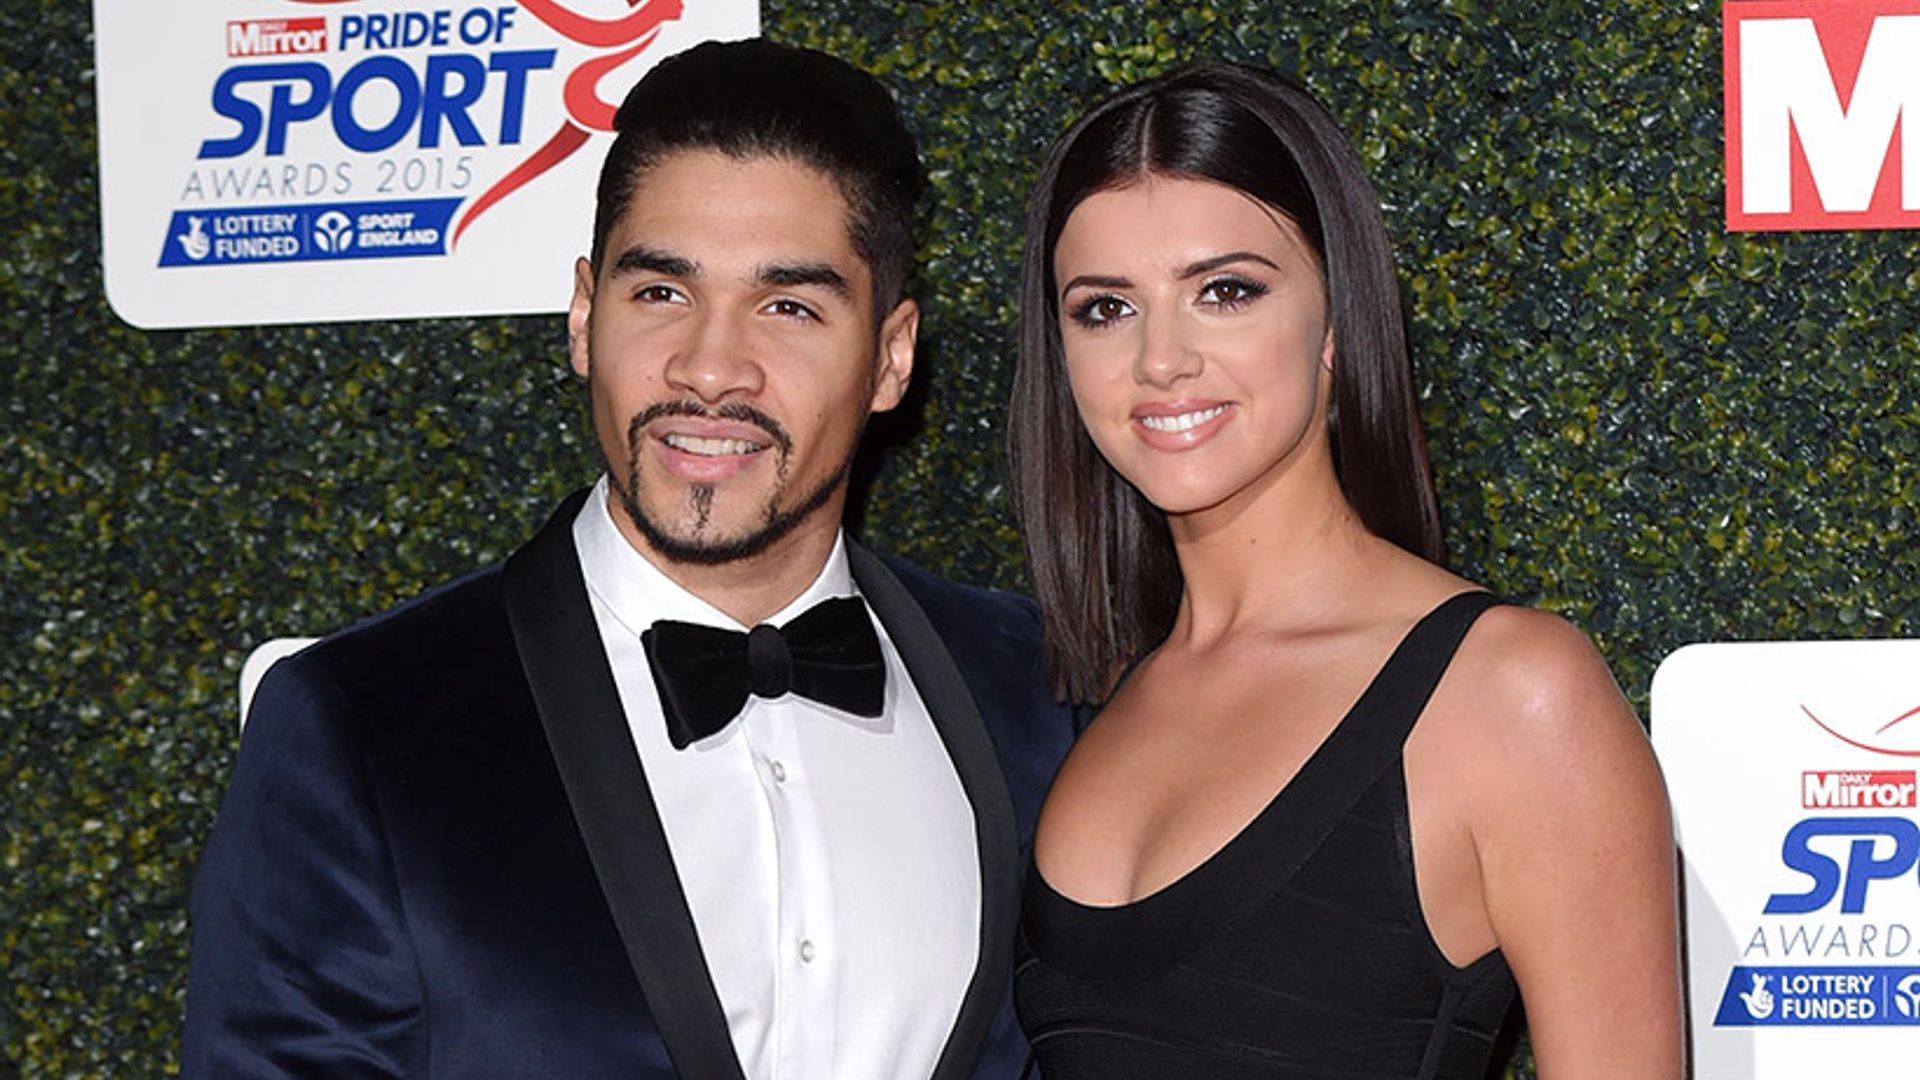 Lucy Mecklenburgh sends sweet message to ex Louis Smith after silver medal win